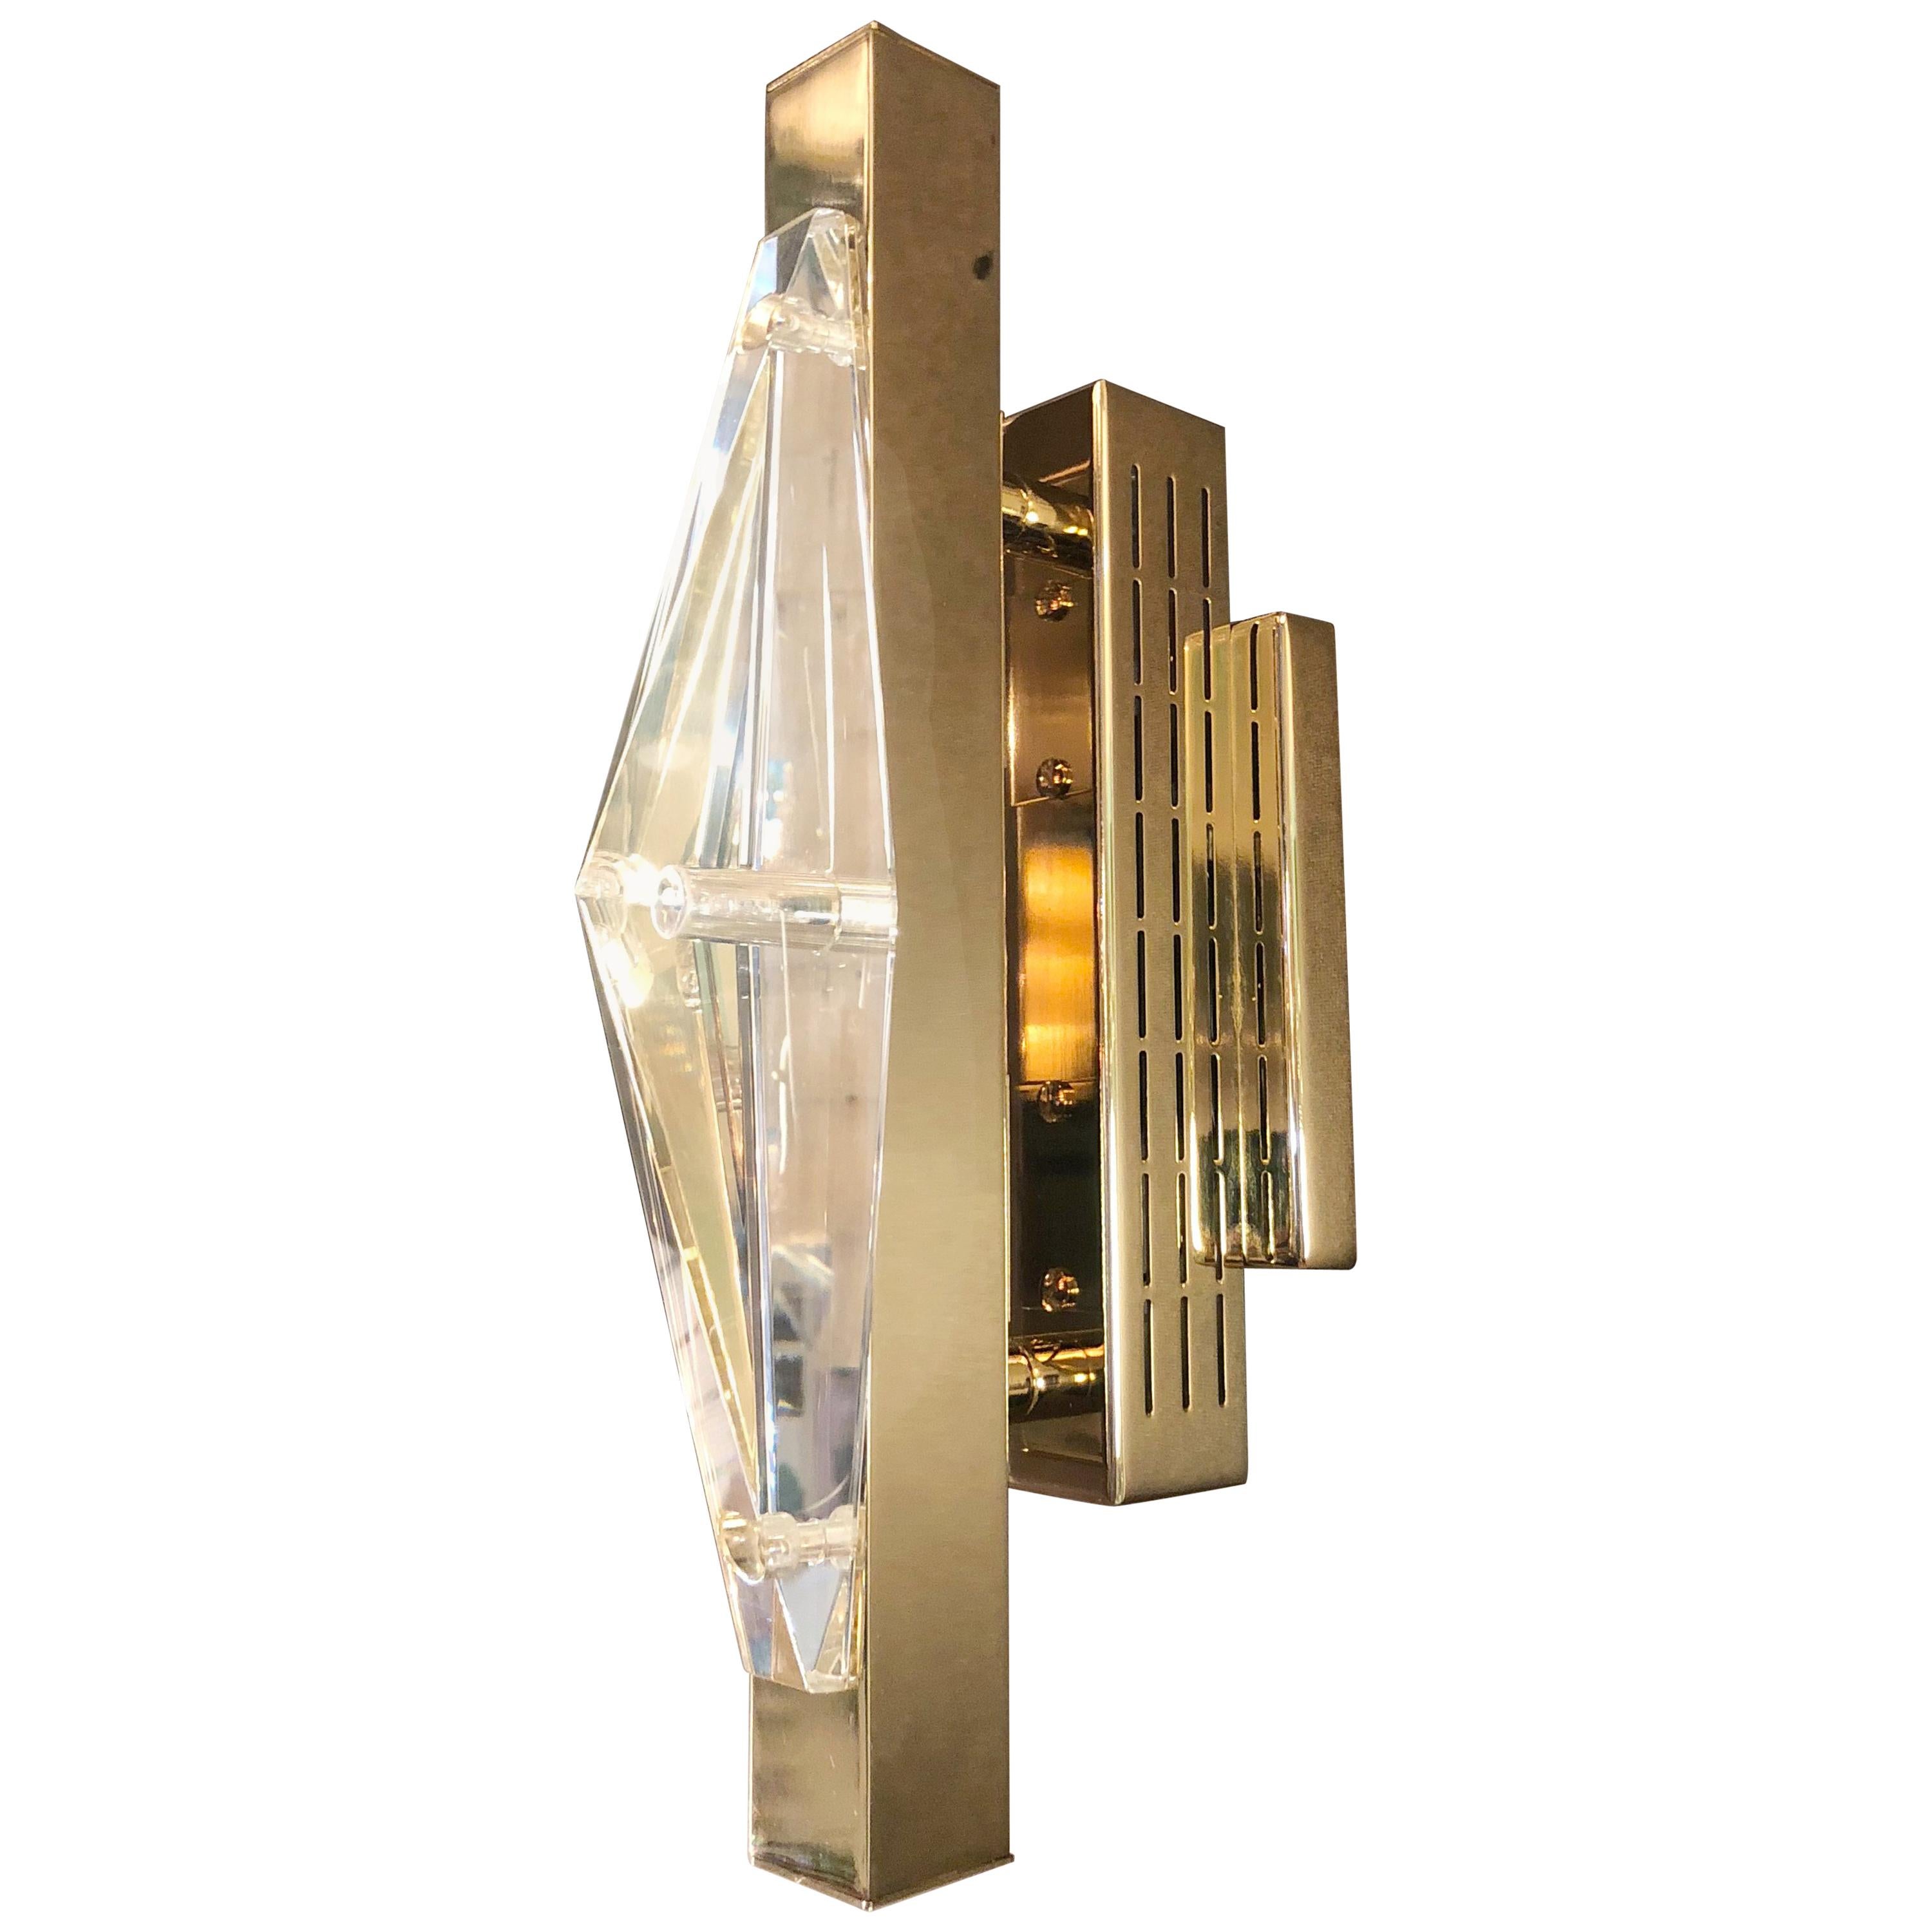 Limited edition Italian wall light or flush mount with clear faceted crystal on gold-plated finish / Designed by Fabio Bergomi for Fabio Ltd / Made in Italy
1 light / G4 LED type / max 2W
Measures: Height 15.75 inches / Width 4.25 inches / Depth 7.5